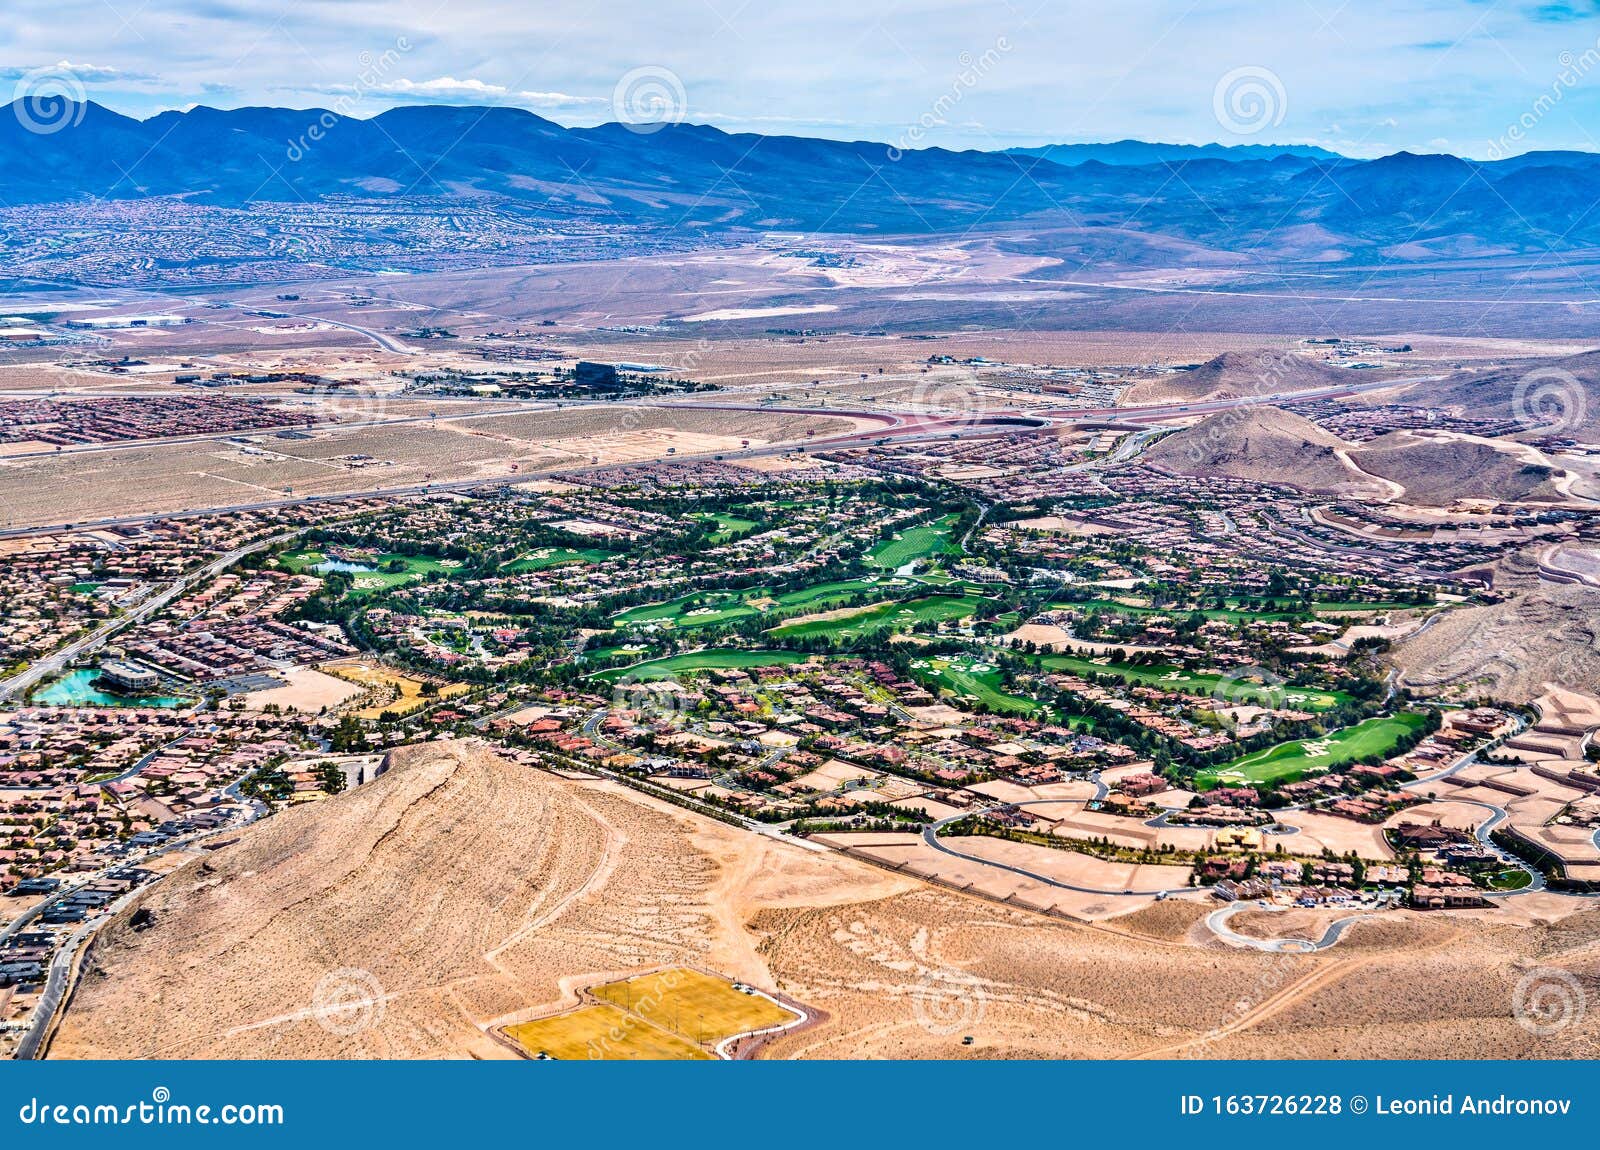 southern highlands in las vegas, usa